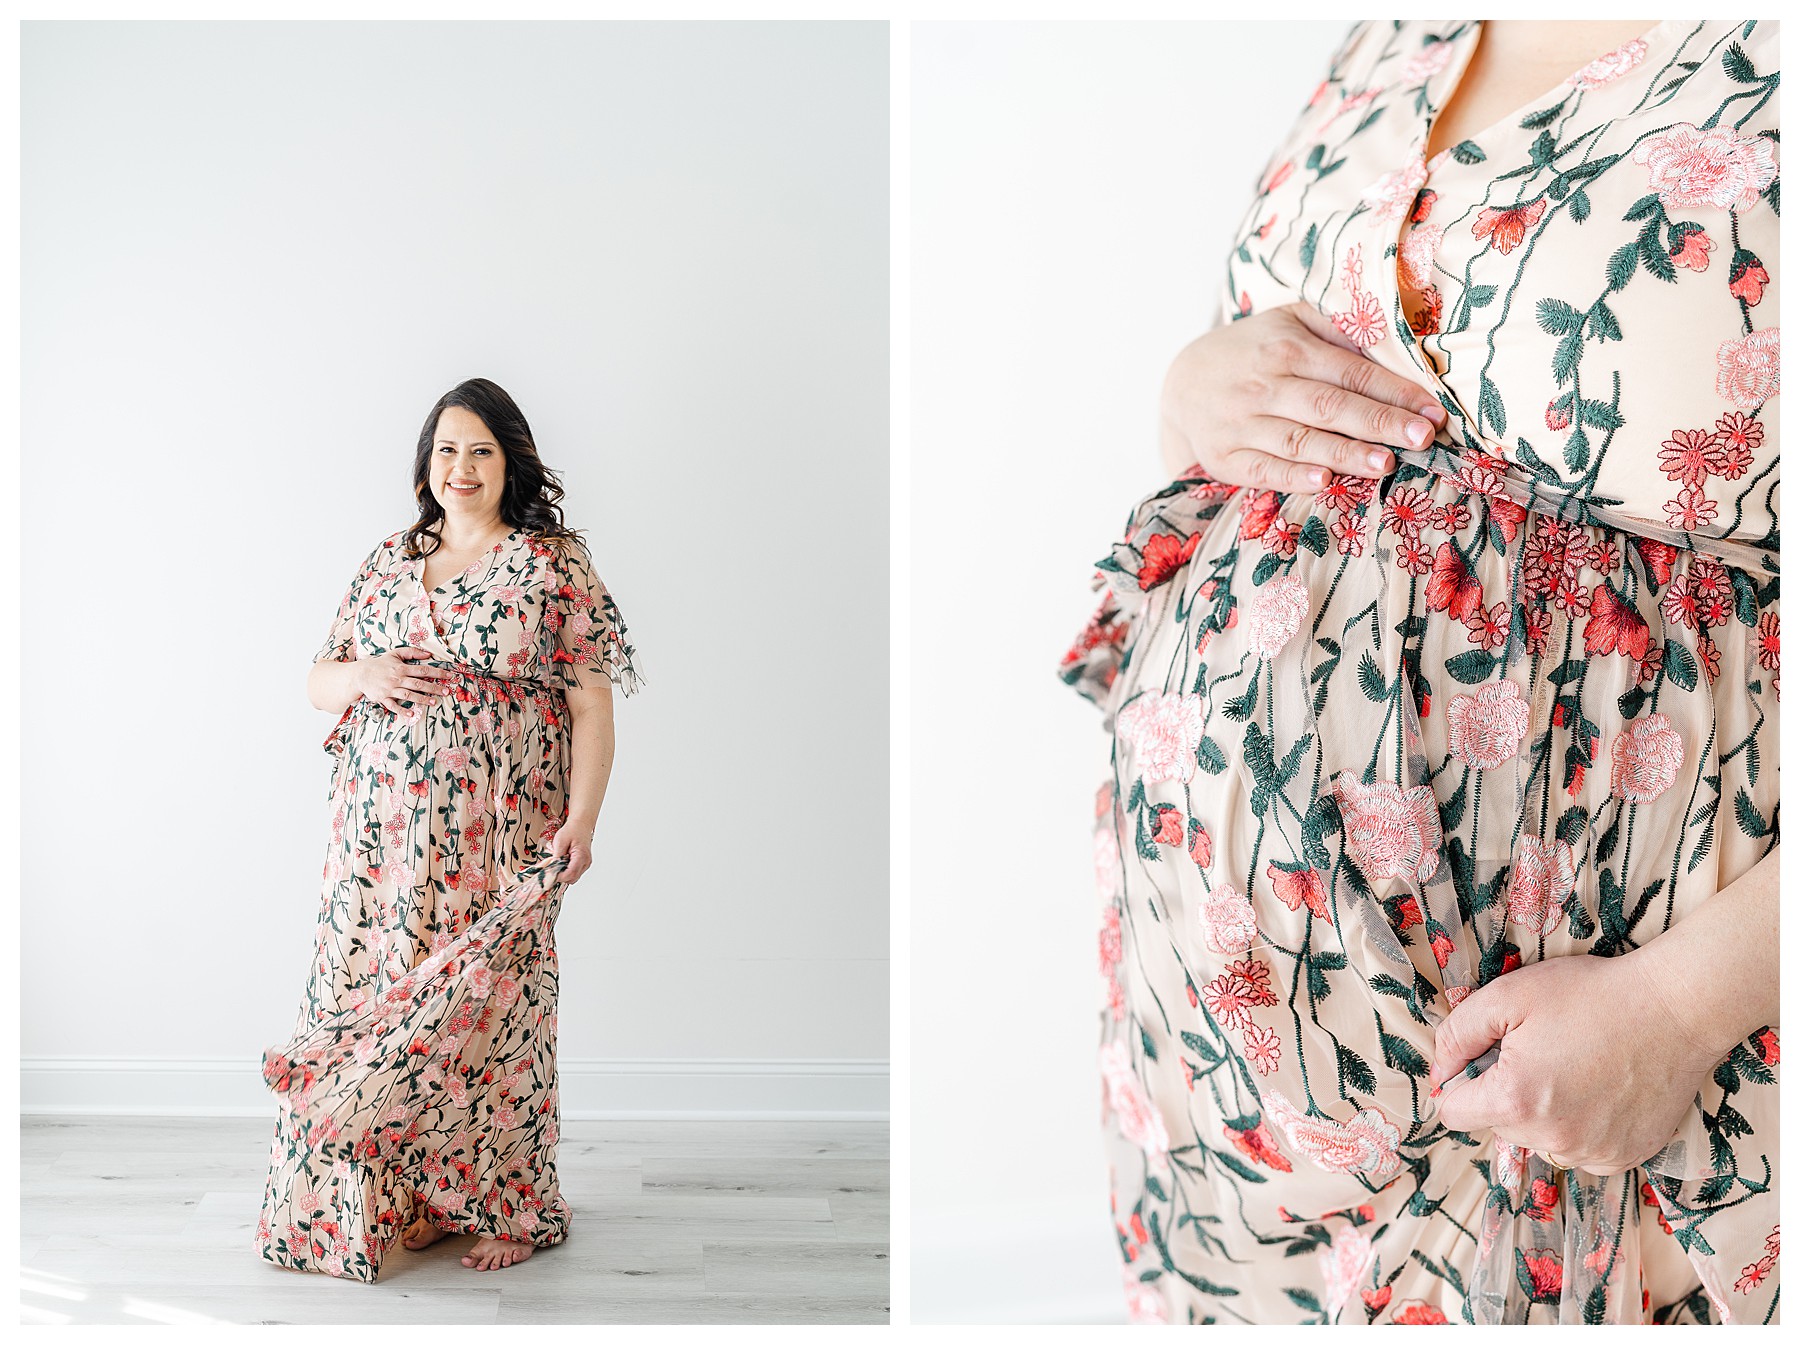 Pregnant mother wearing a floral dress for Atlanta maternity photography session.